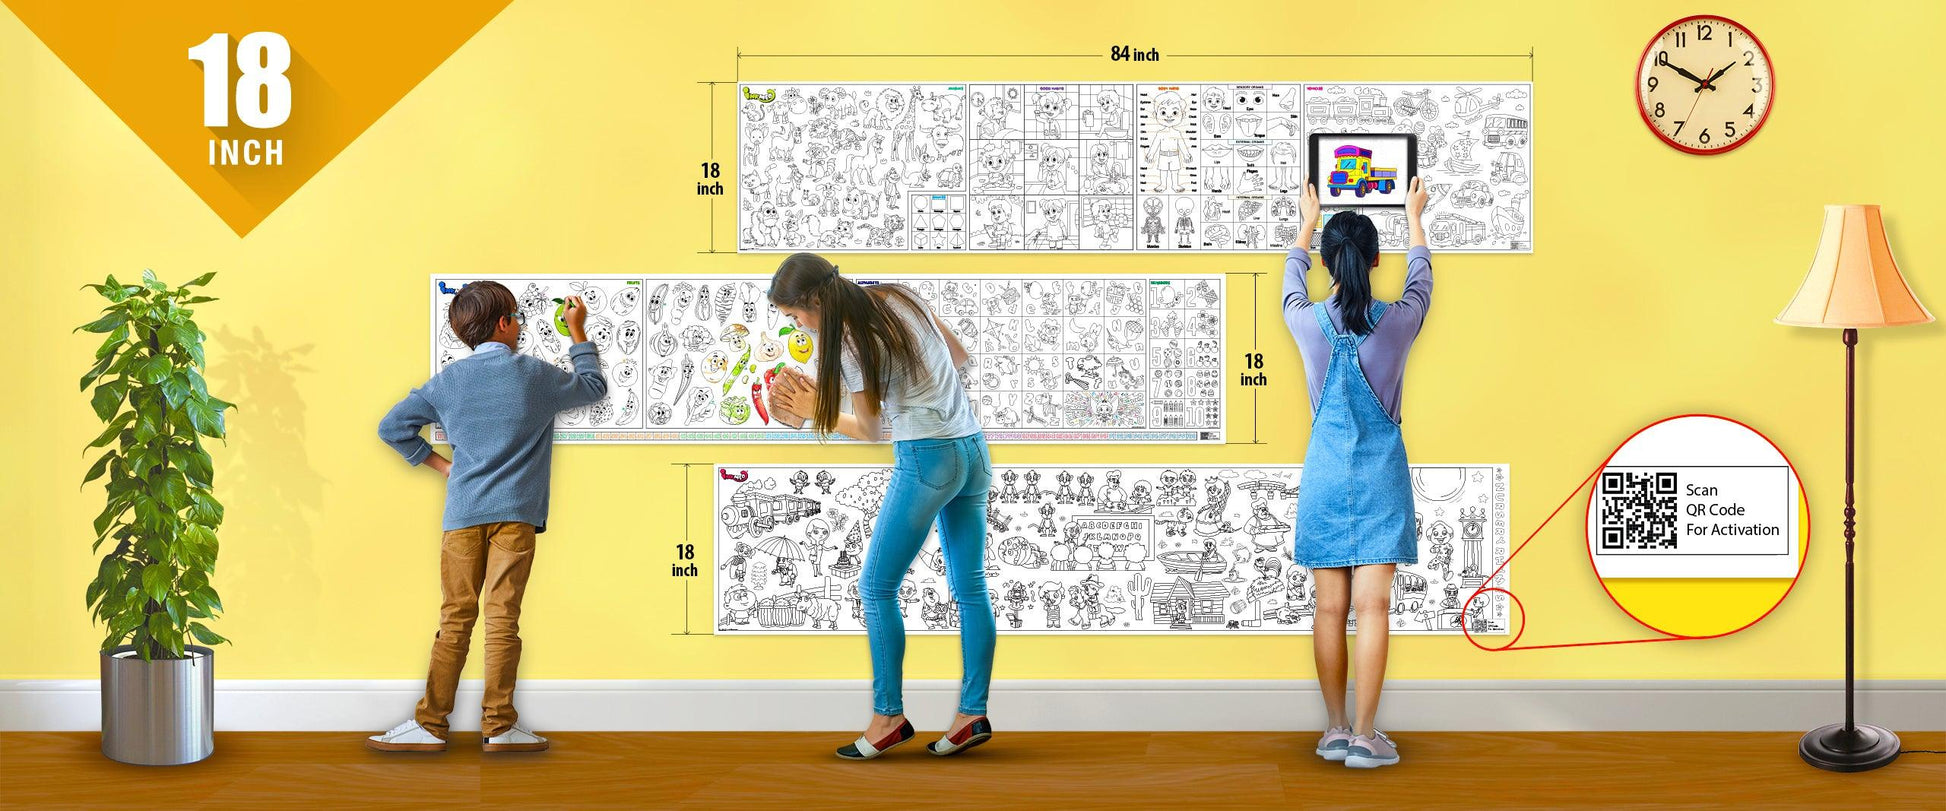 The image depicts a yellow wall with three rolls attached to it, being colored by children. The size of the rolls is specified as 18 inches in the top left corner.